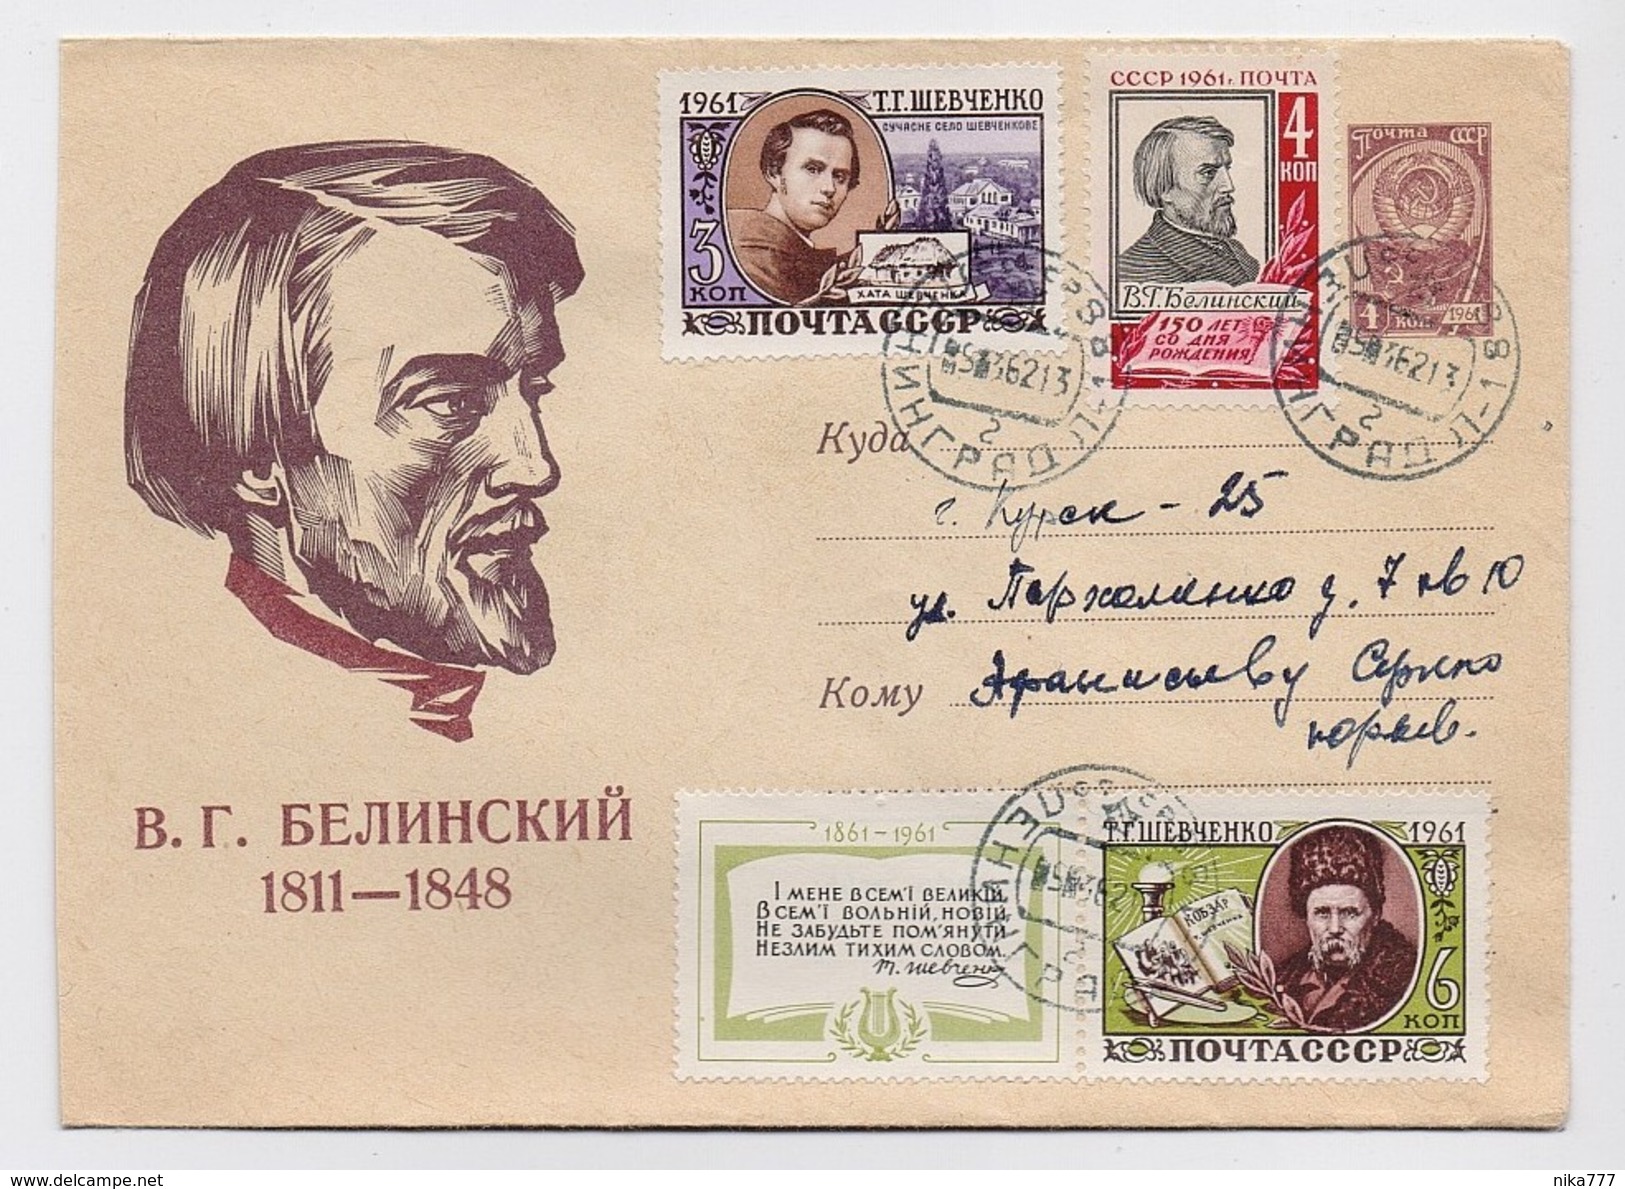 MAIL Post Stationery Cover Used USSR RUSSIA Set Stamp Literature Writer Shevchenko Belinsky Critic Leningrad - Covers & Documents